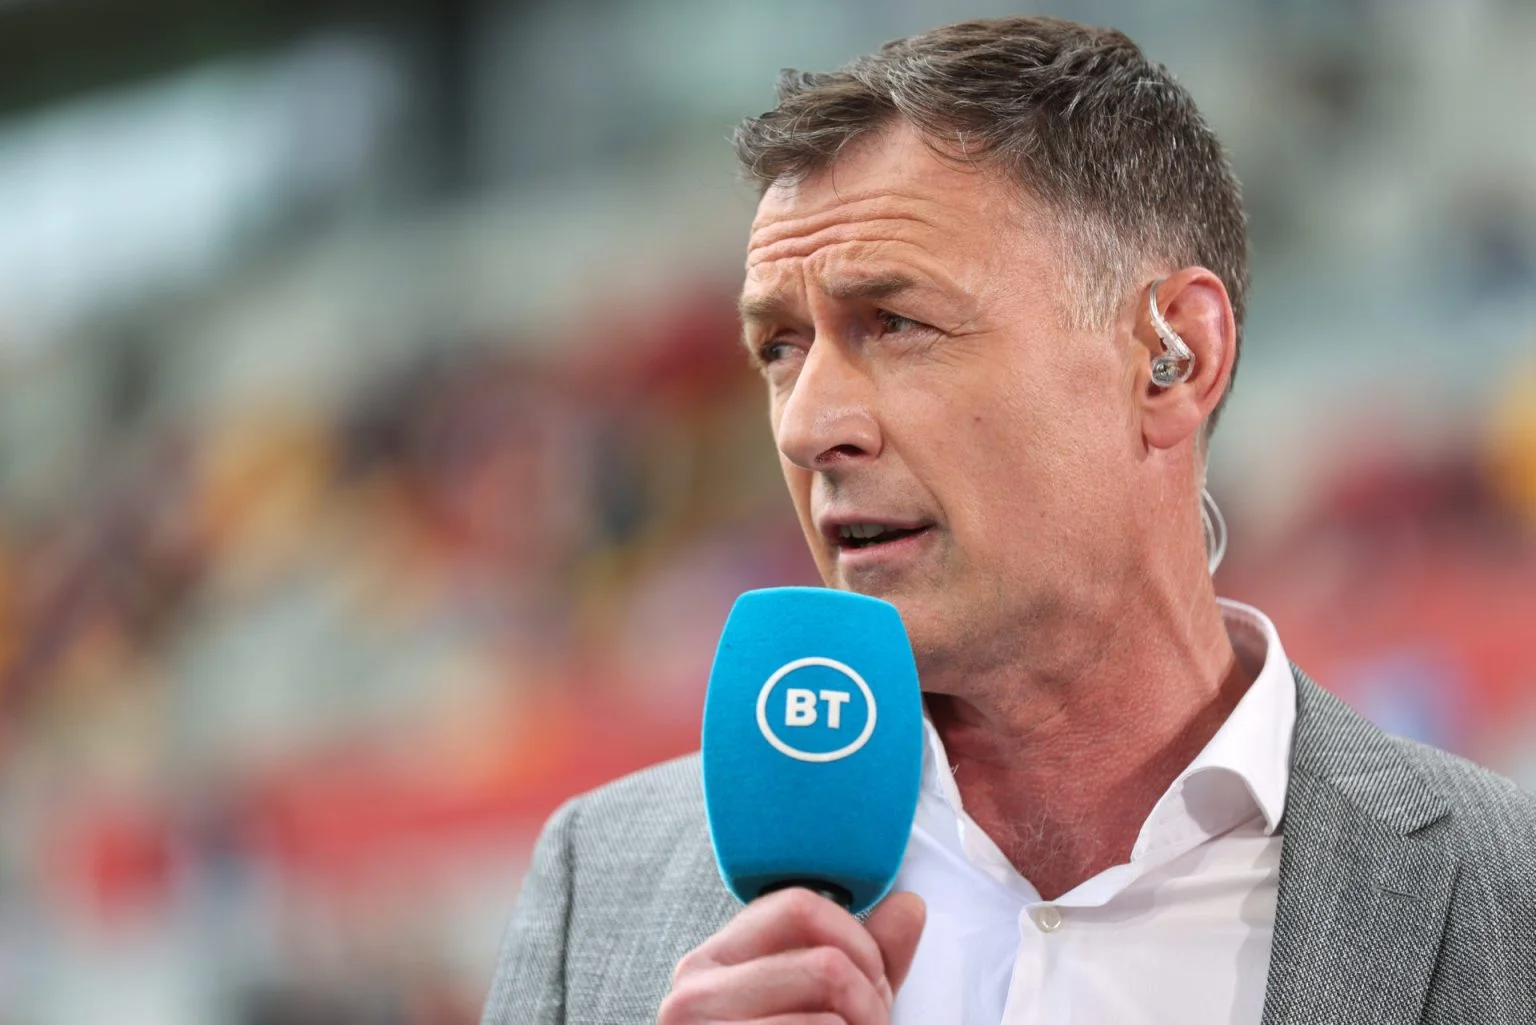 EPL: Chris Sutton predicts Man City vs Liverpool, Chelsea, Arsenal, others